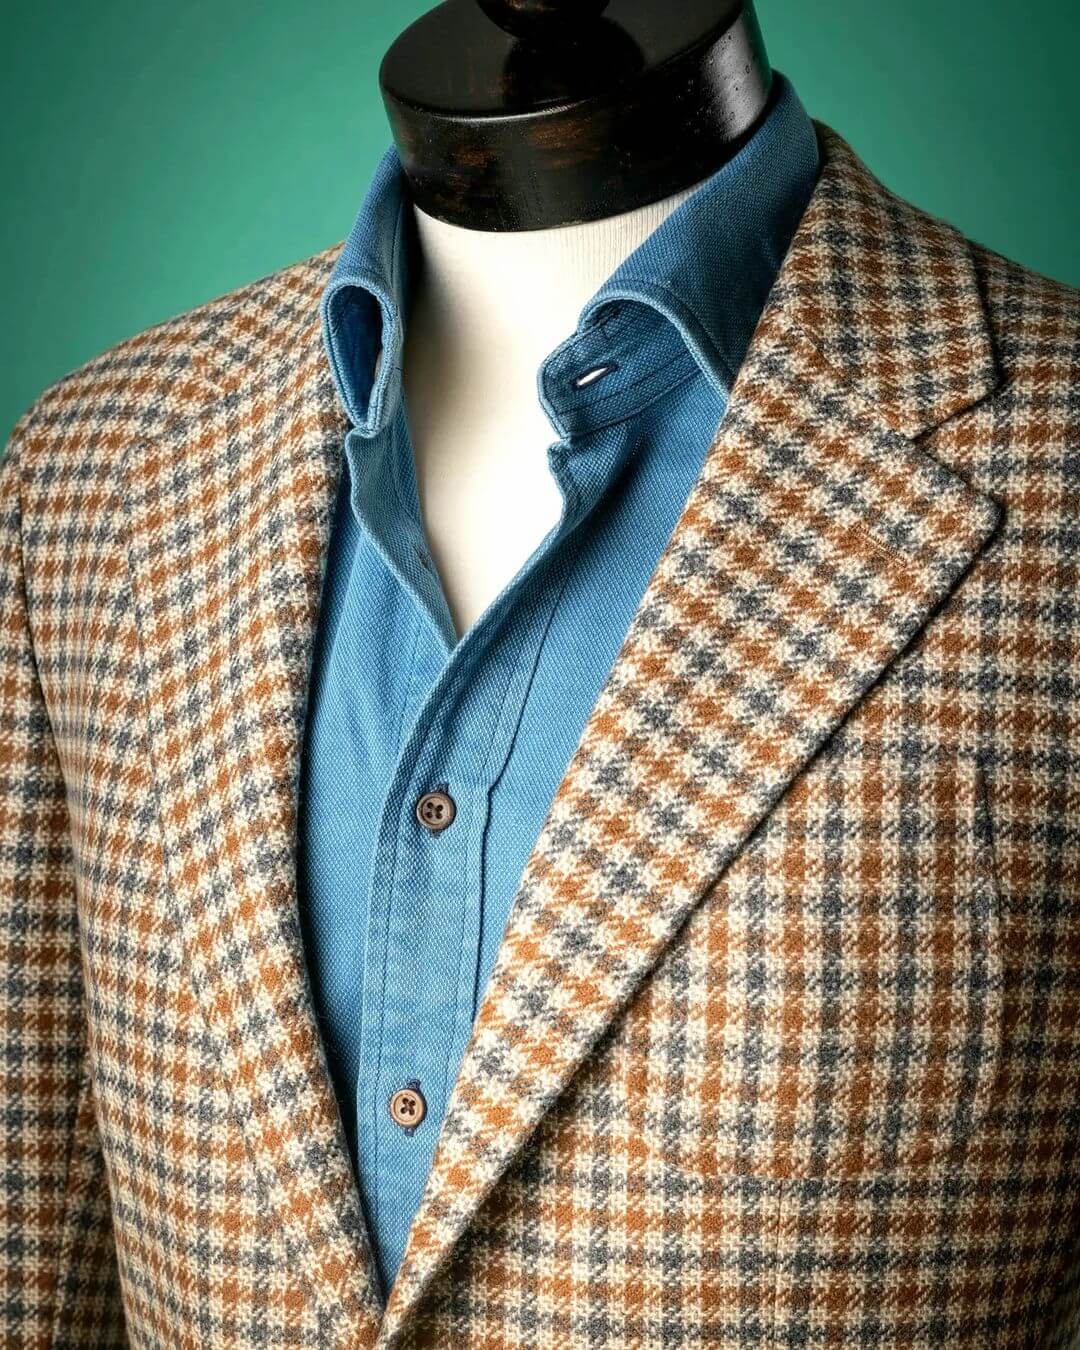 Sports Coat for Men The Houndstooth Sports Coat